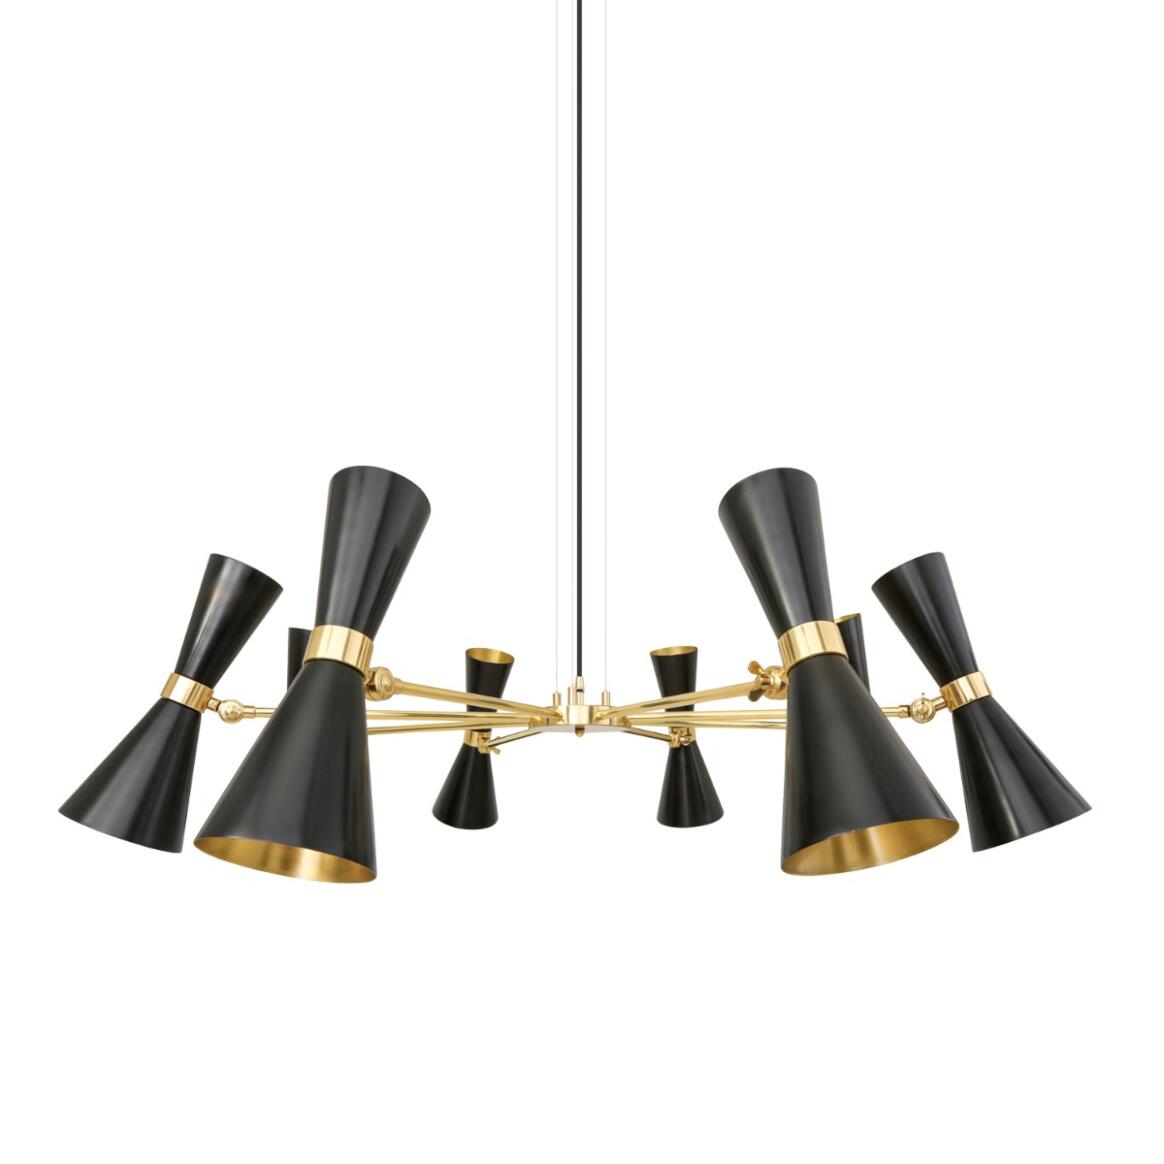 Cairo Mid-Century Chandelier, Eight-Arm main product image